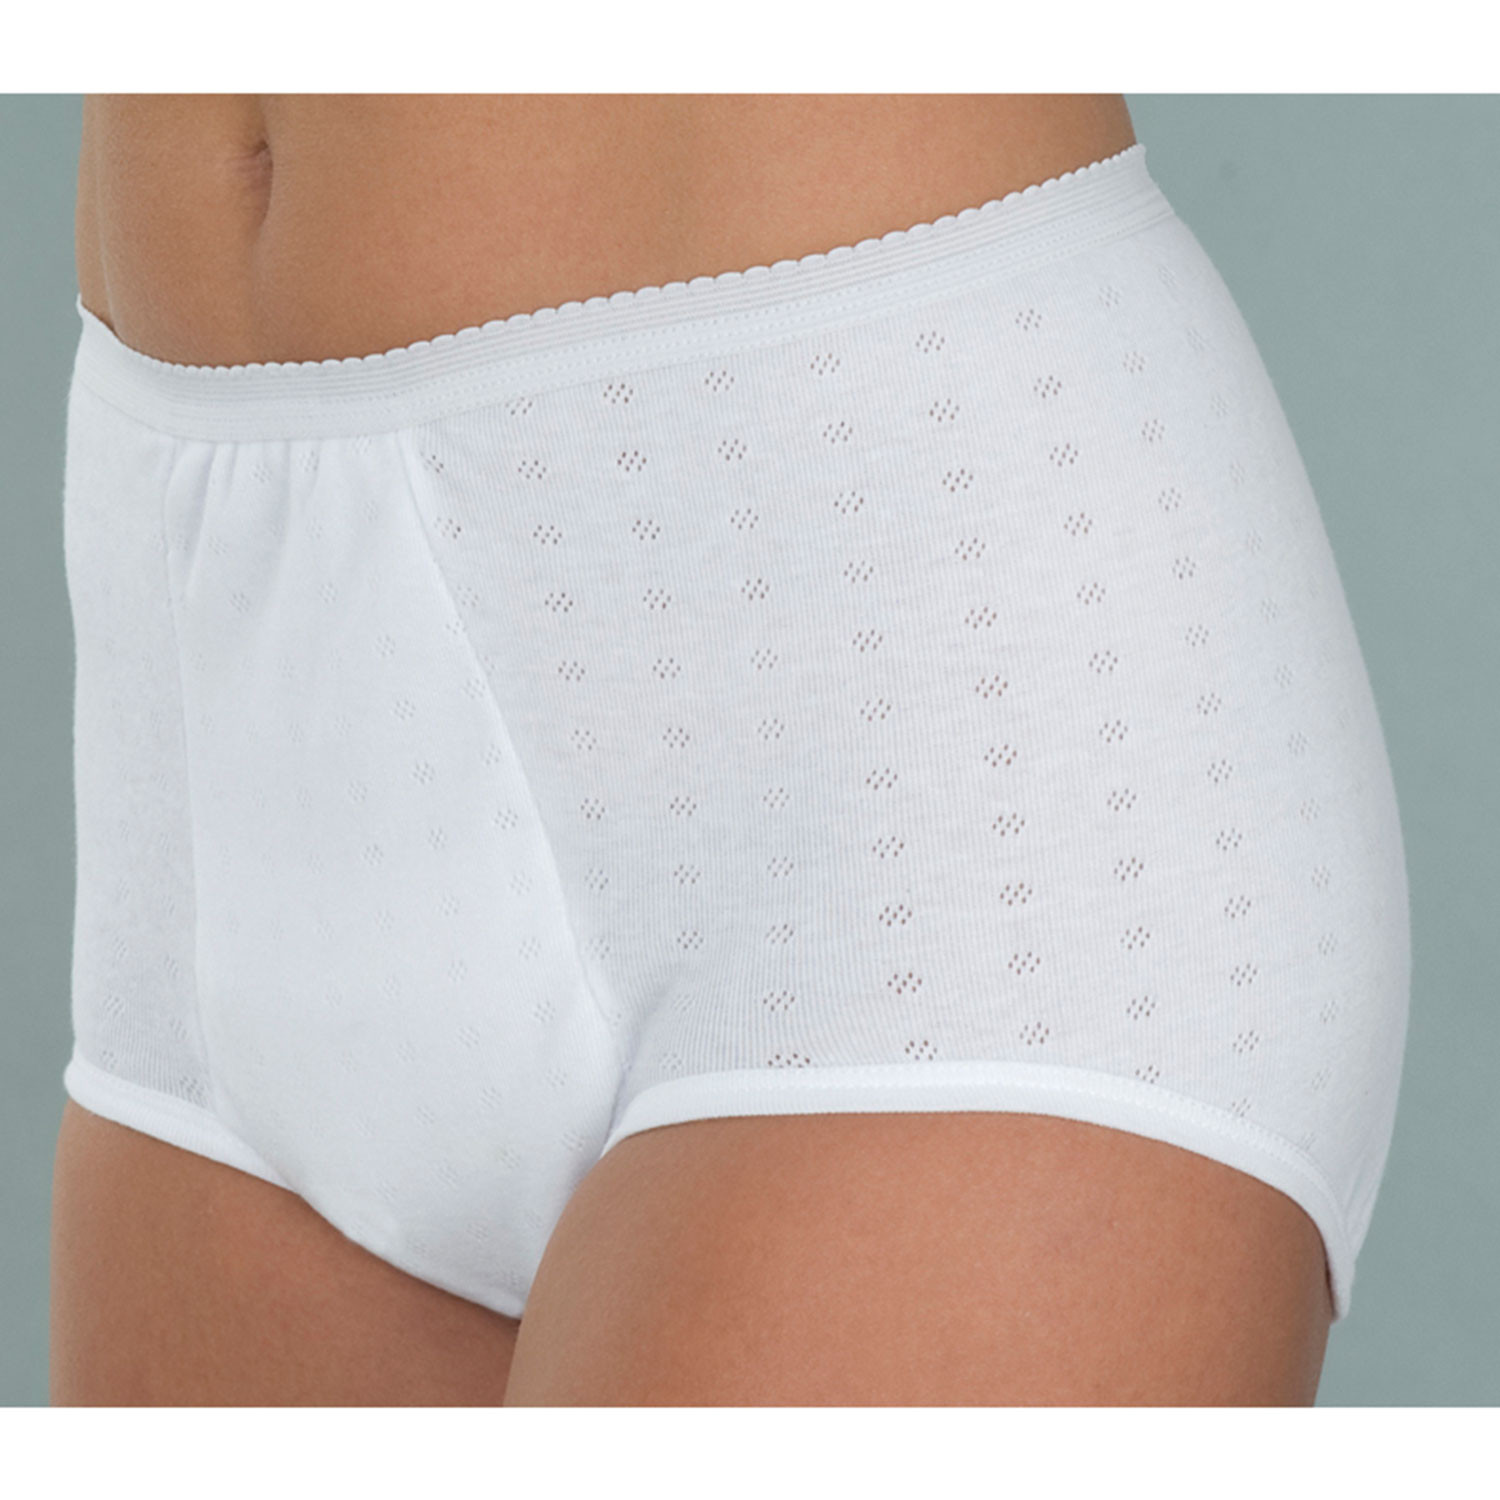 Reusable Women's Incontinence Underwear - Washable for Everyday Use